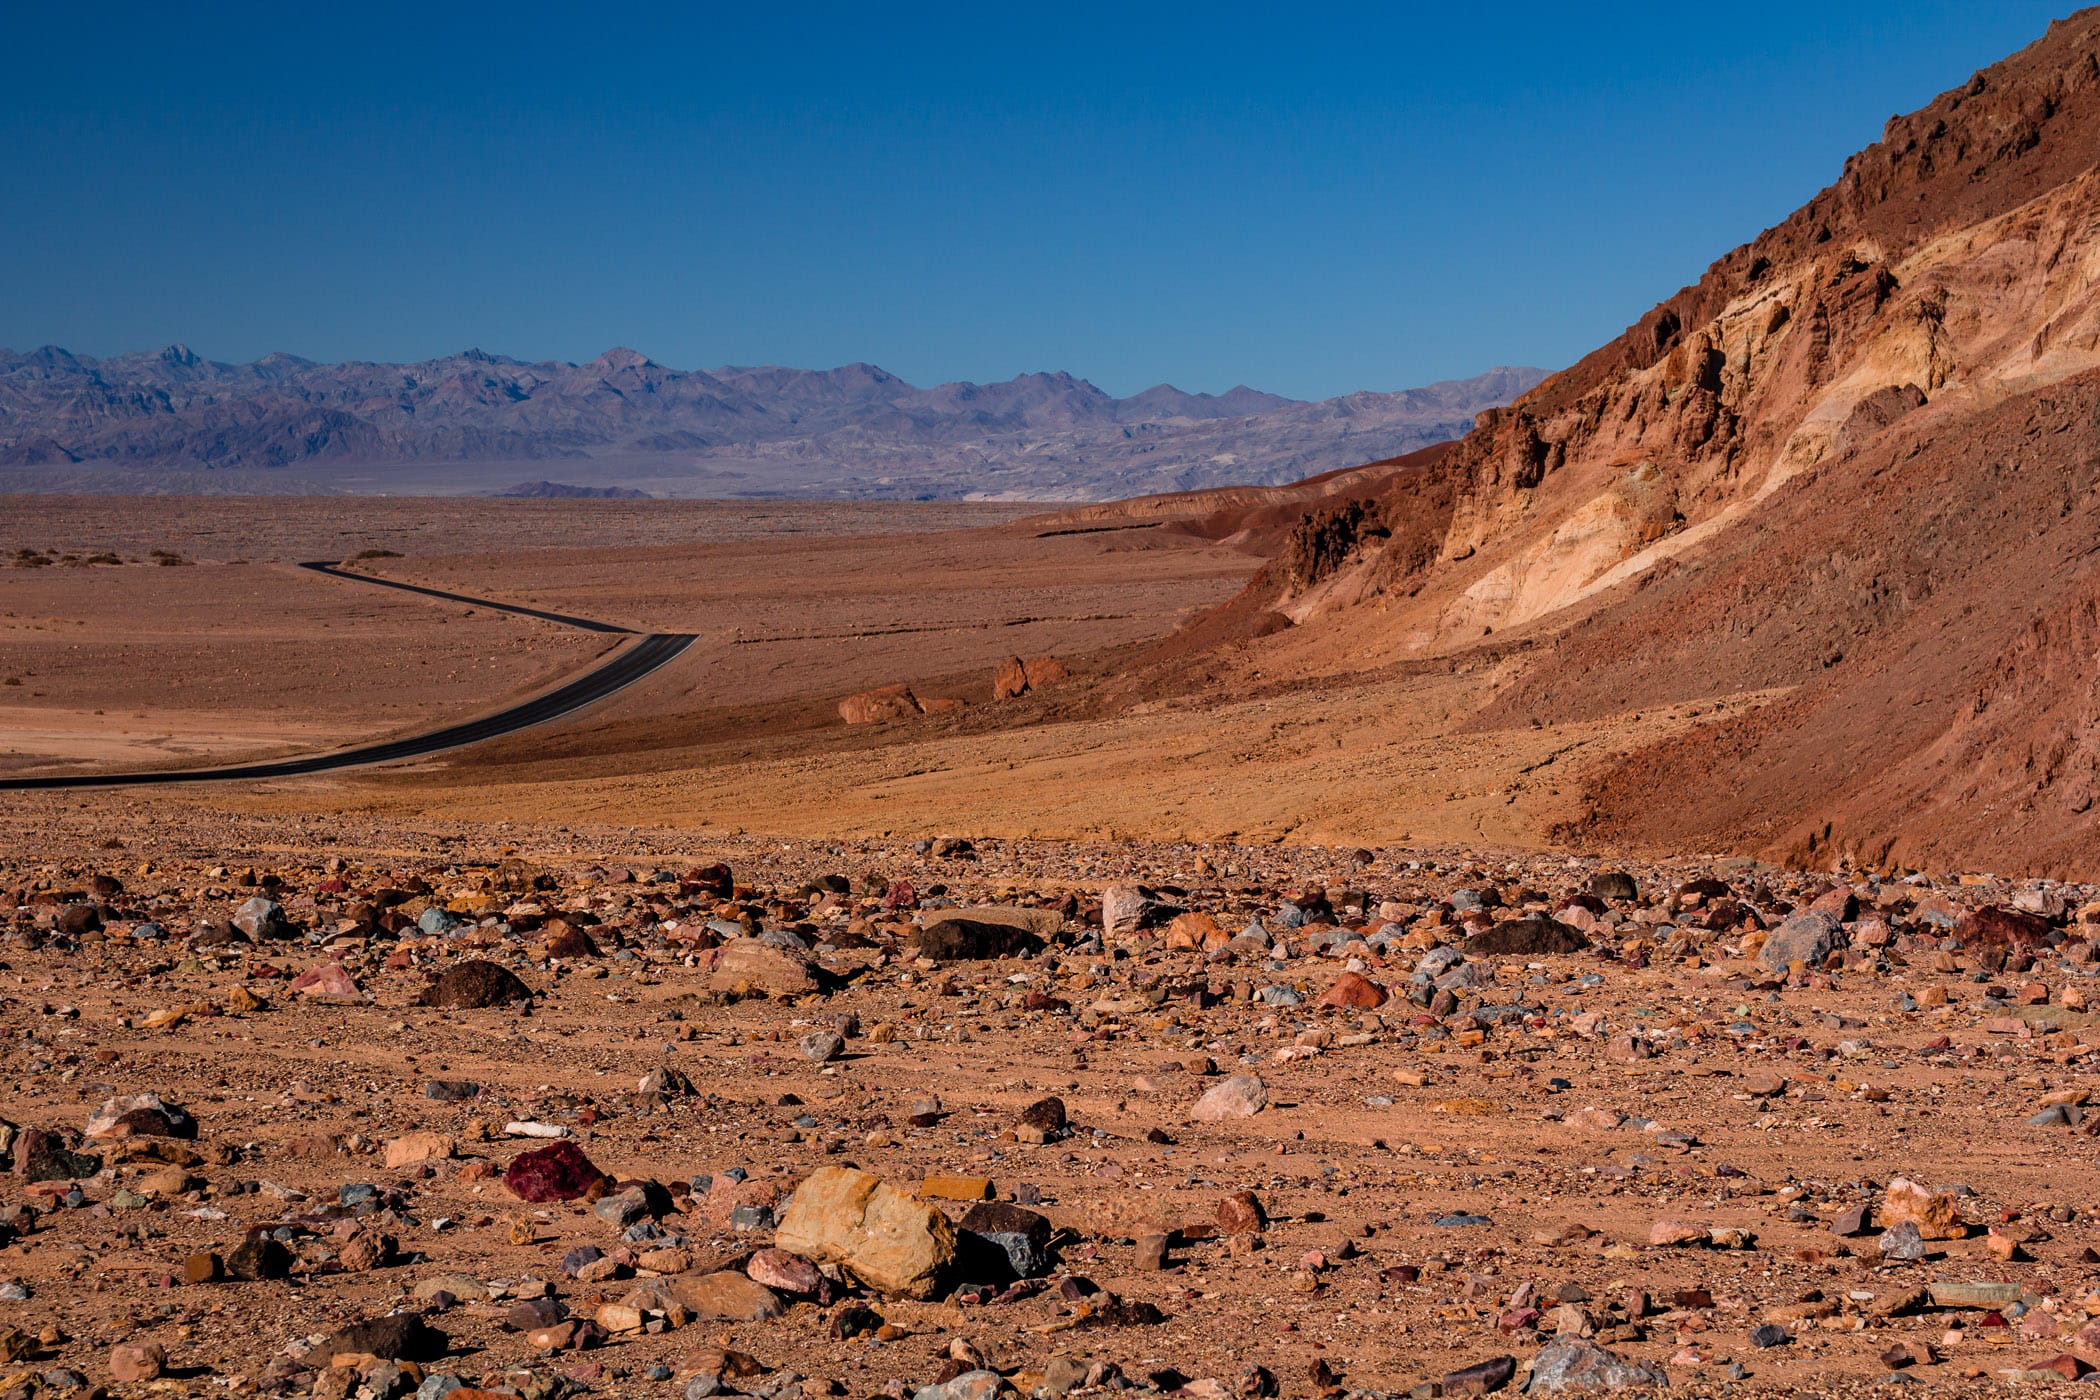 Multi-colored rocks lie on the arid desert ground at California's Death Valley National Park.